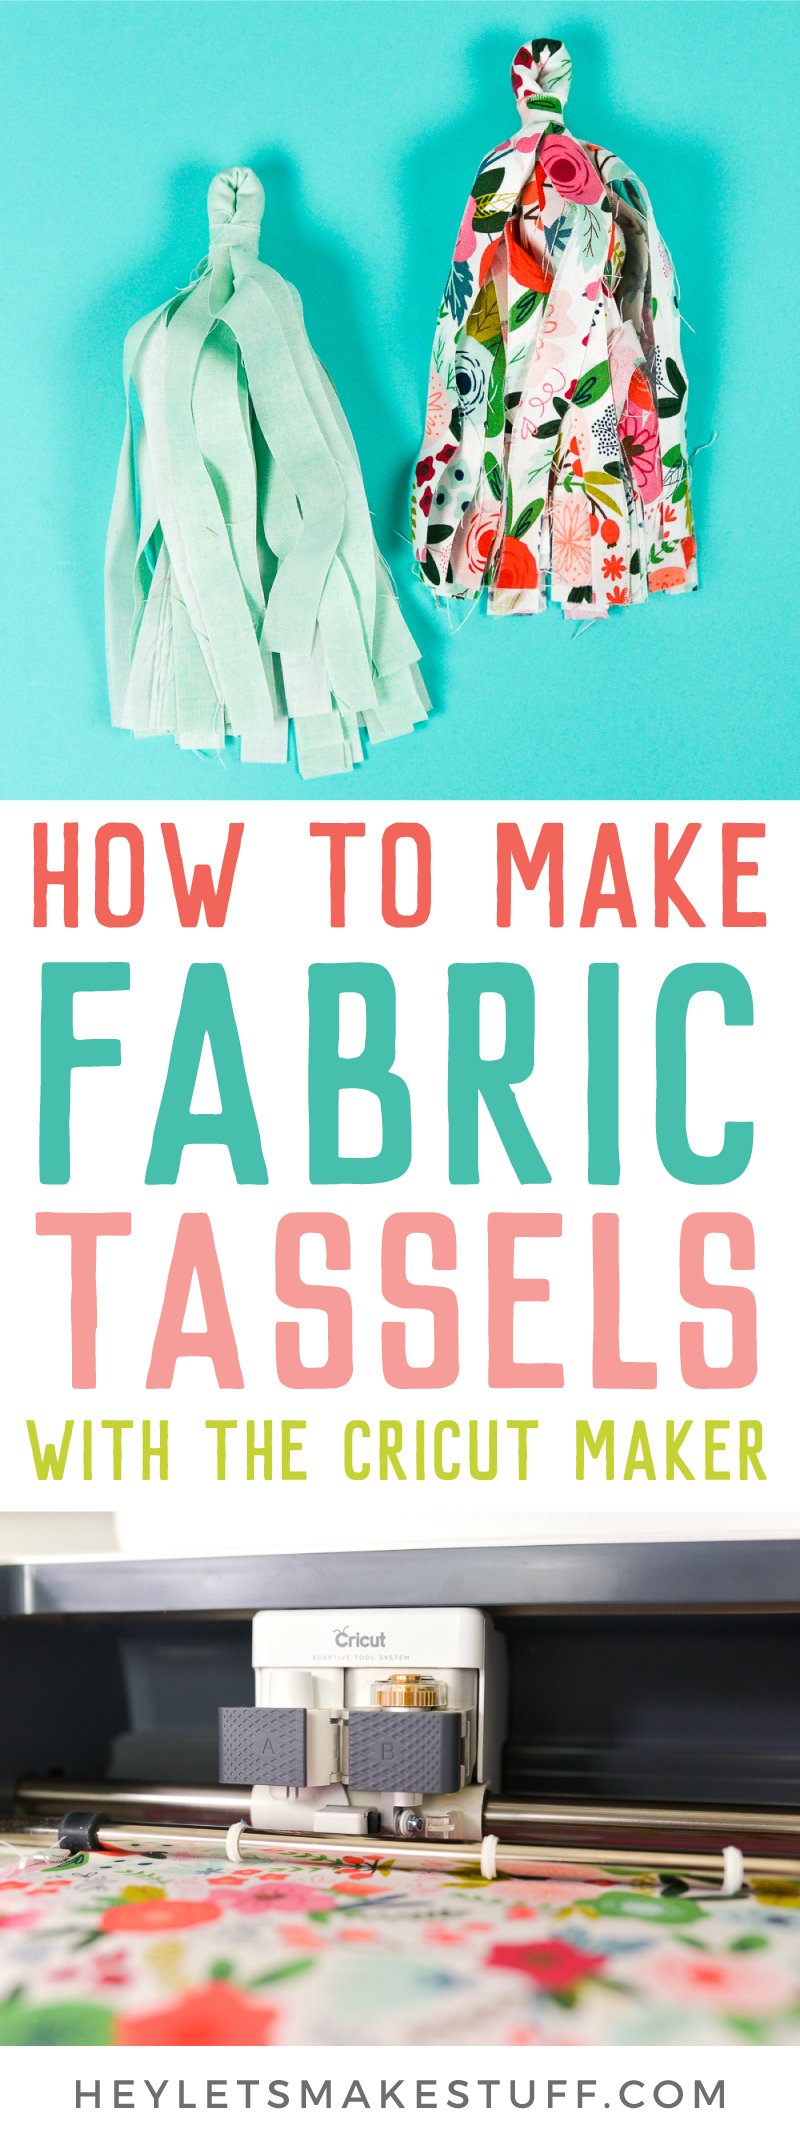 Fabric tassels and an image of a Cricut machine cutting fabric with advertising on How to Make Fabric Tassels by HEYLETSMAKESTUFF.COM